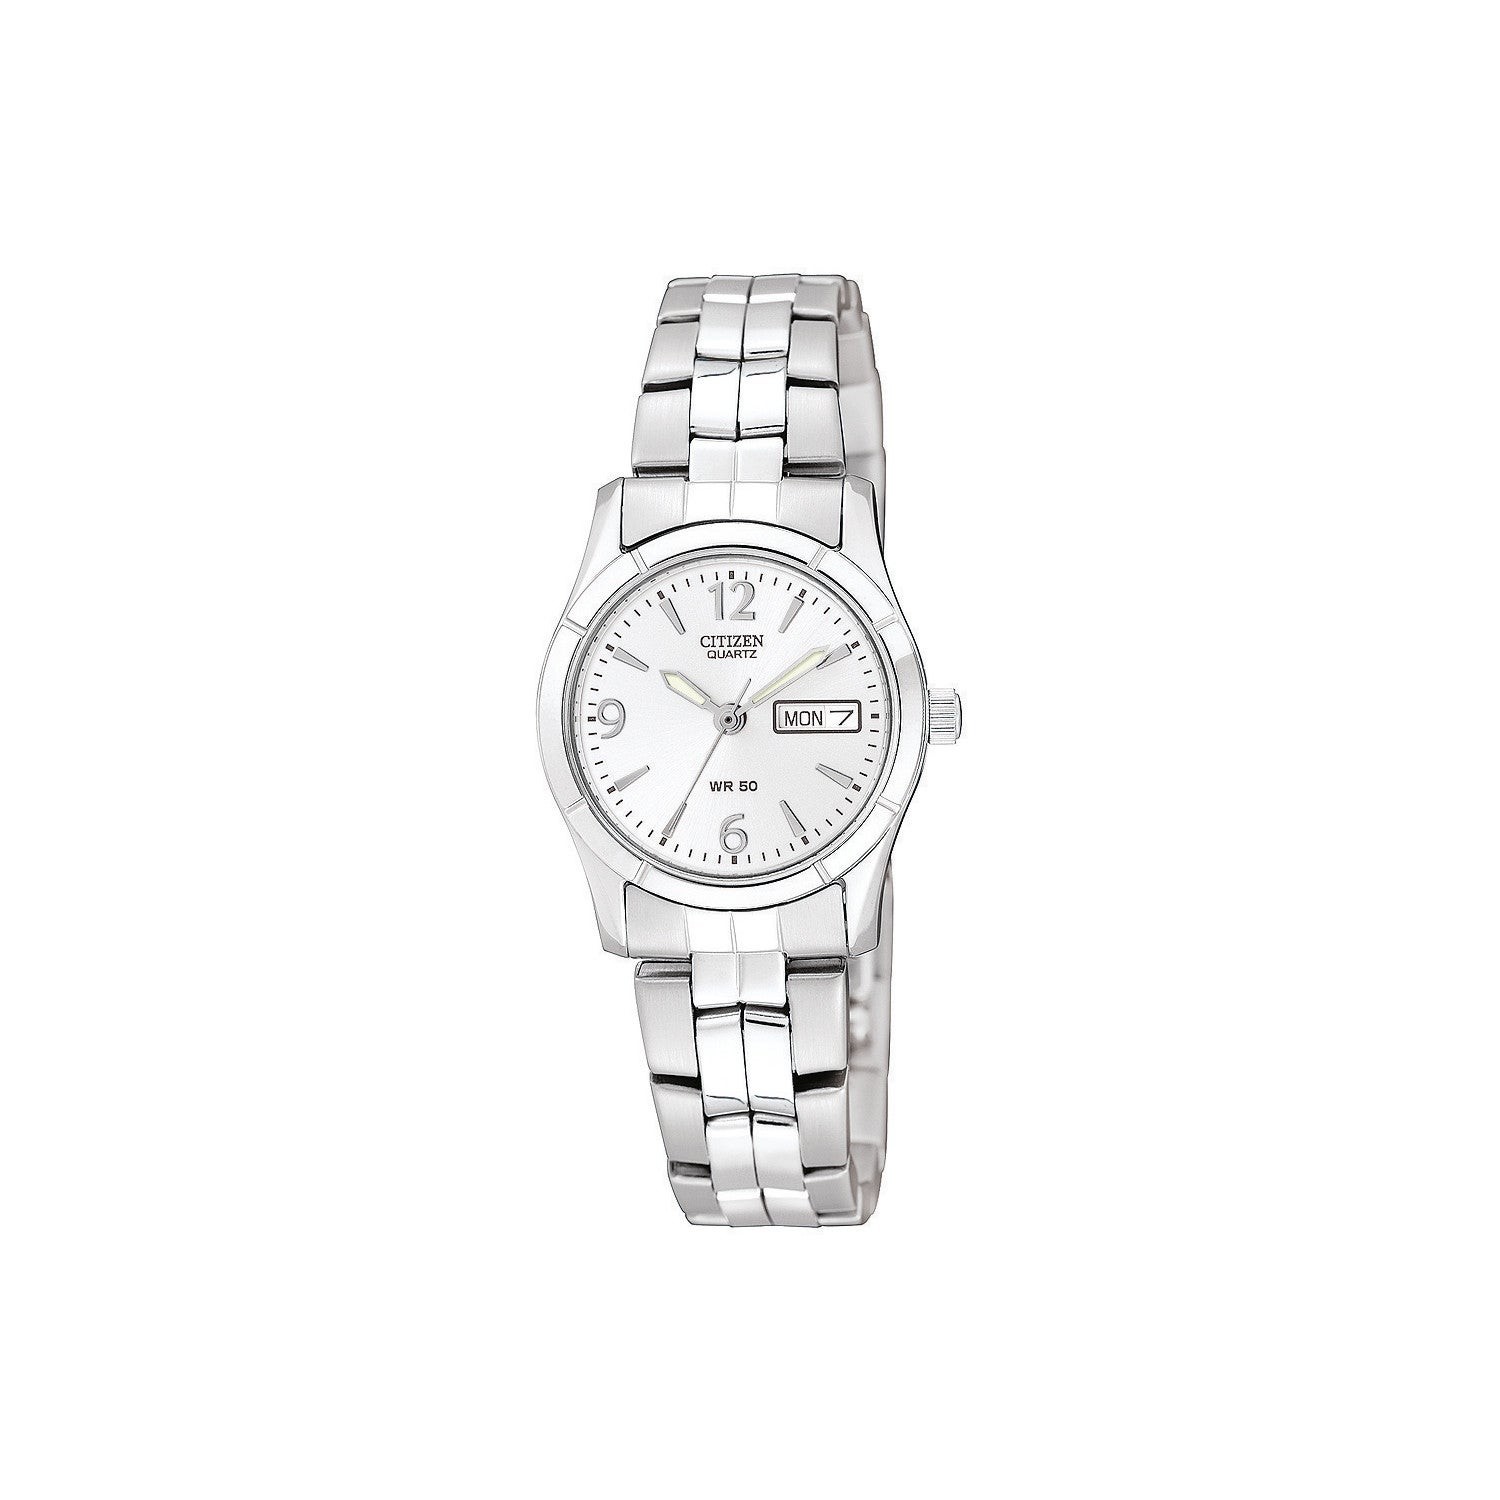 Ladies Quartz Silver-Tone Stainless Steel Watch Silver Dial